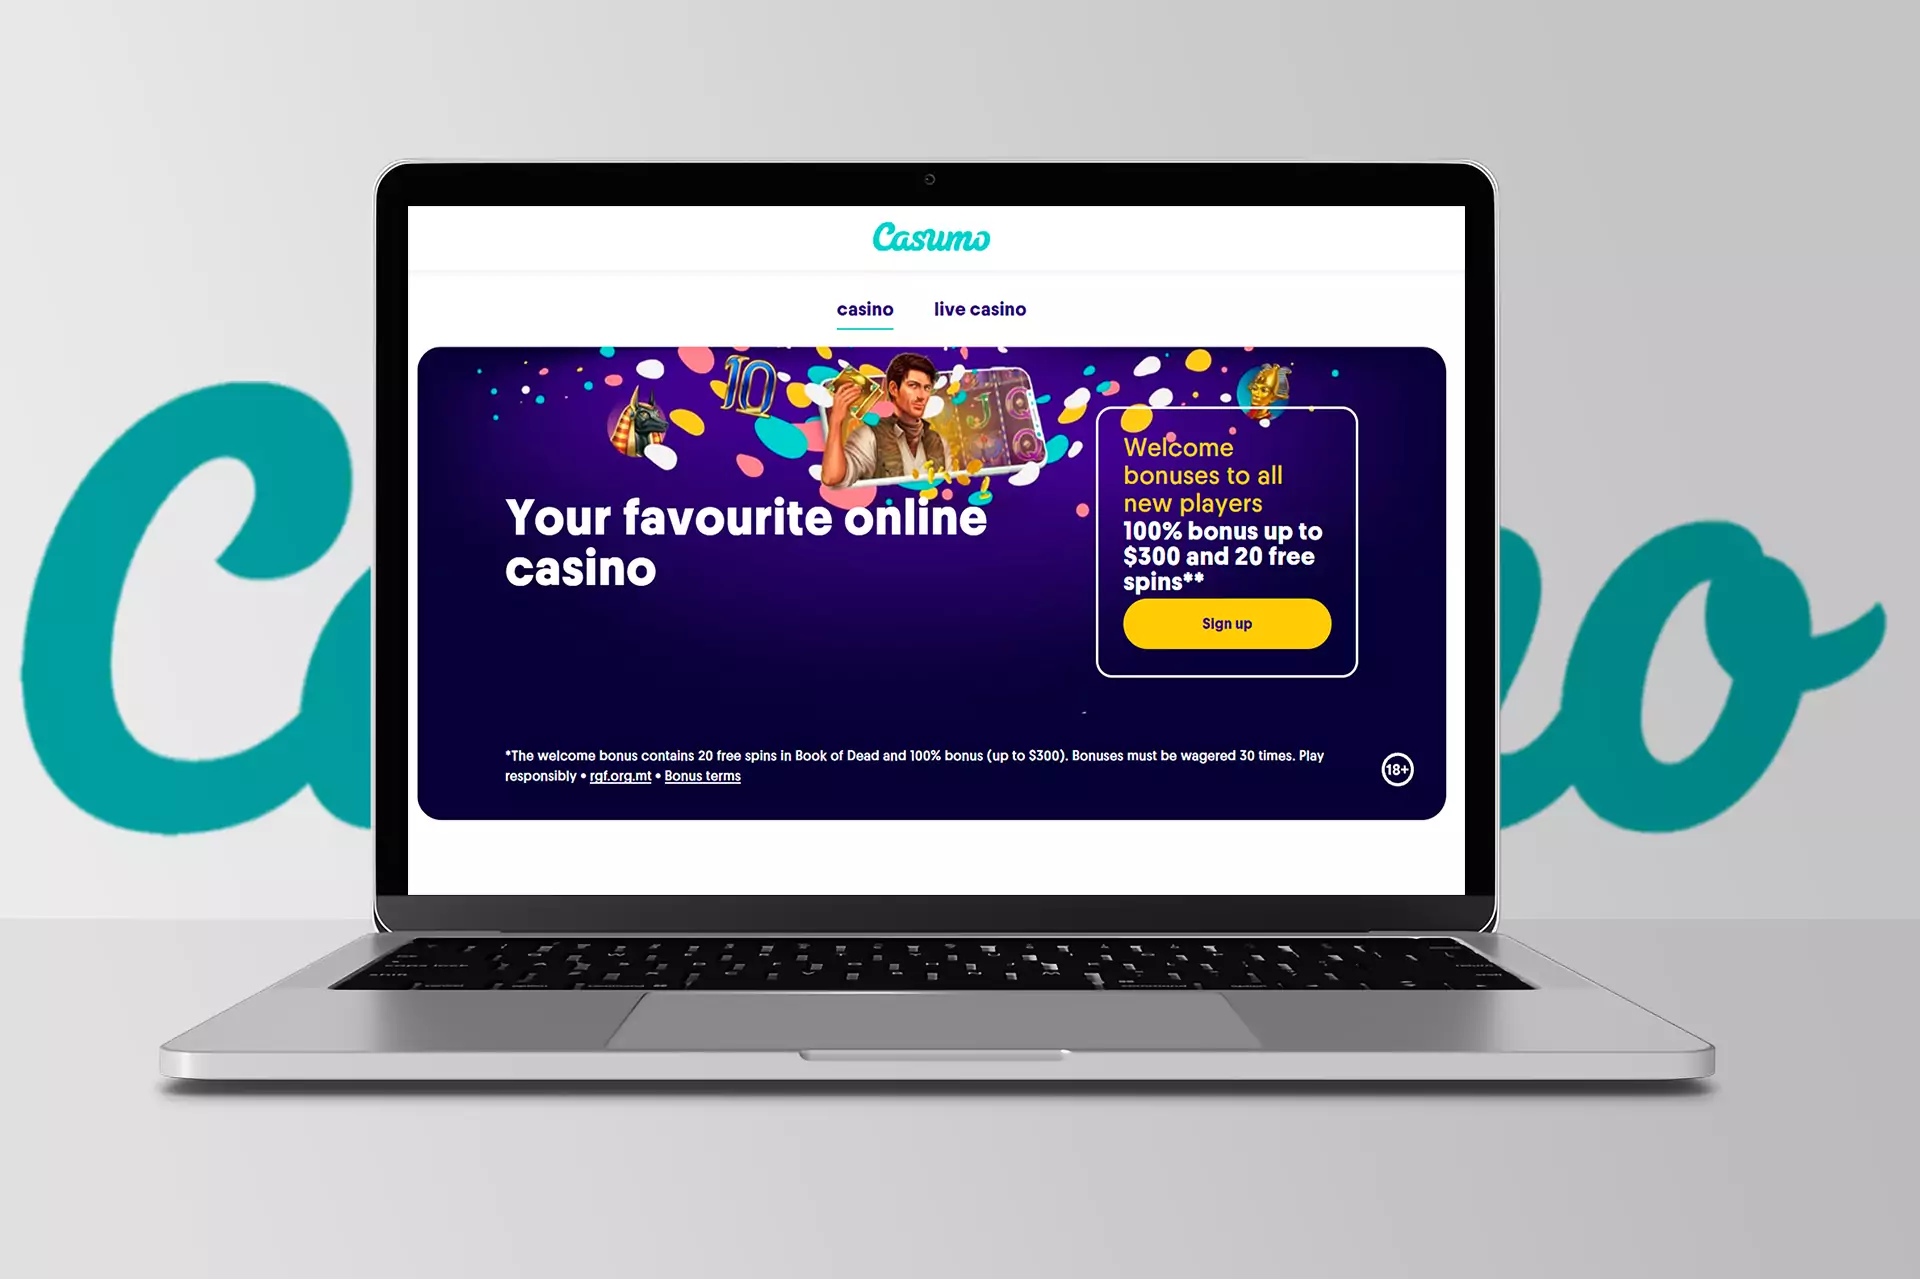 Sign up for Casumo and start gambling on money.